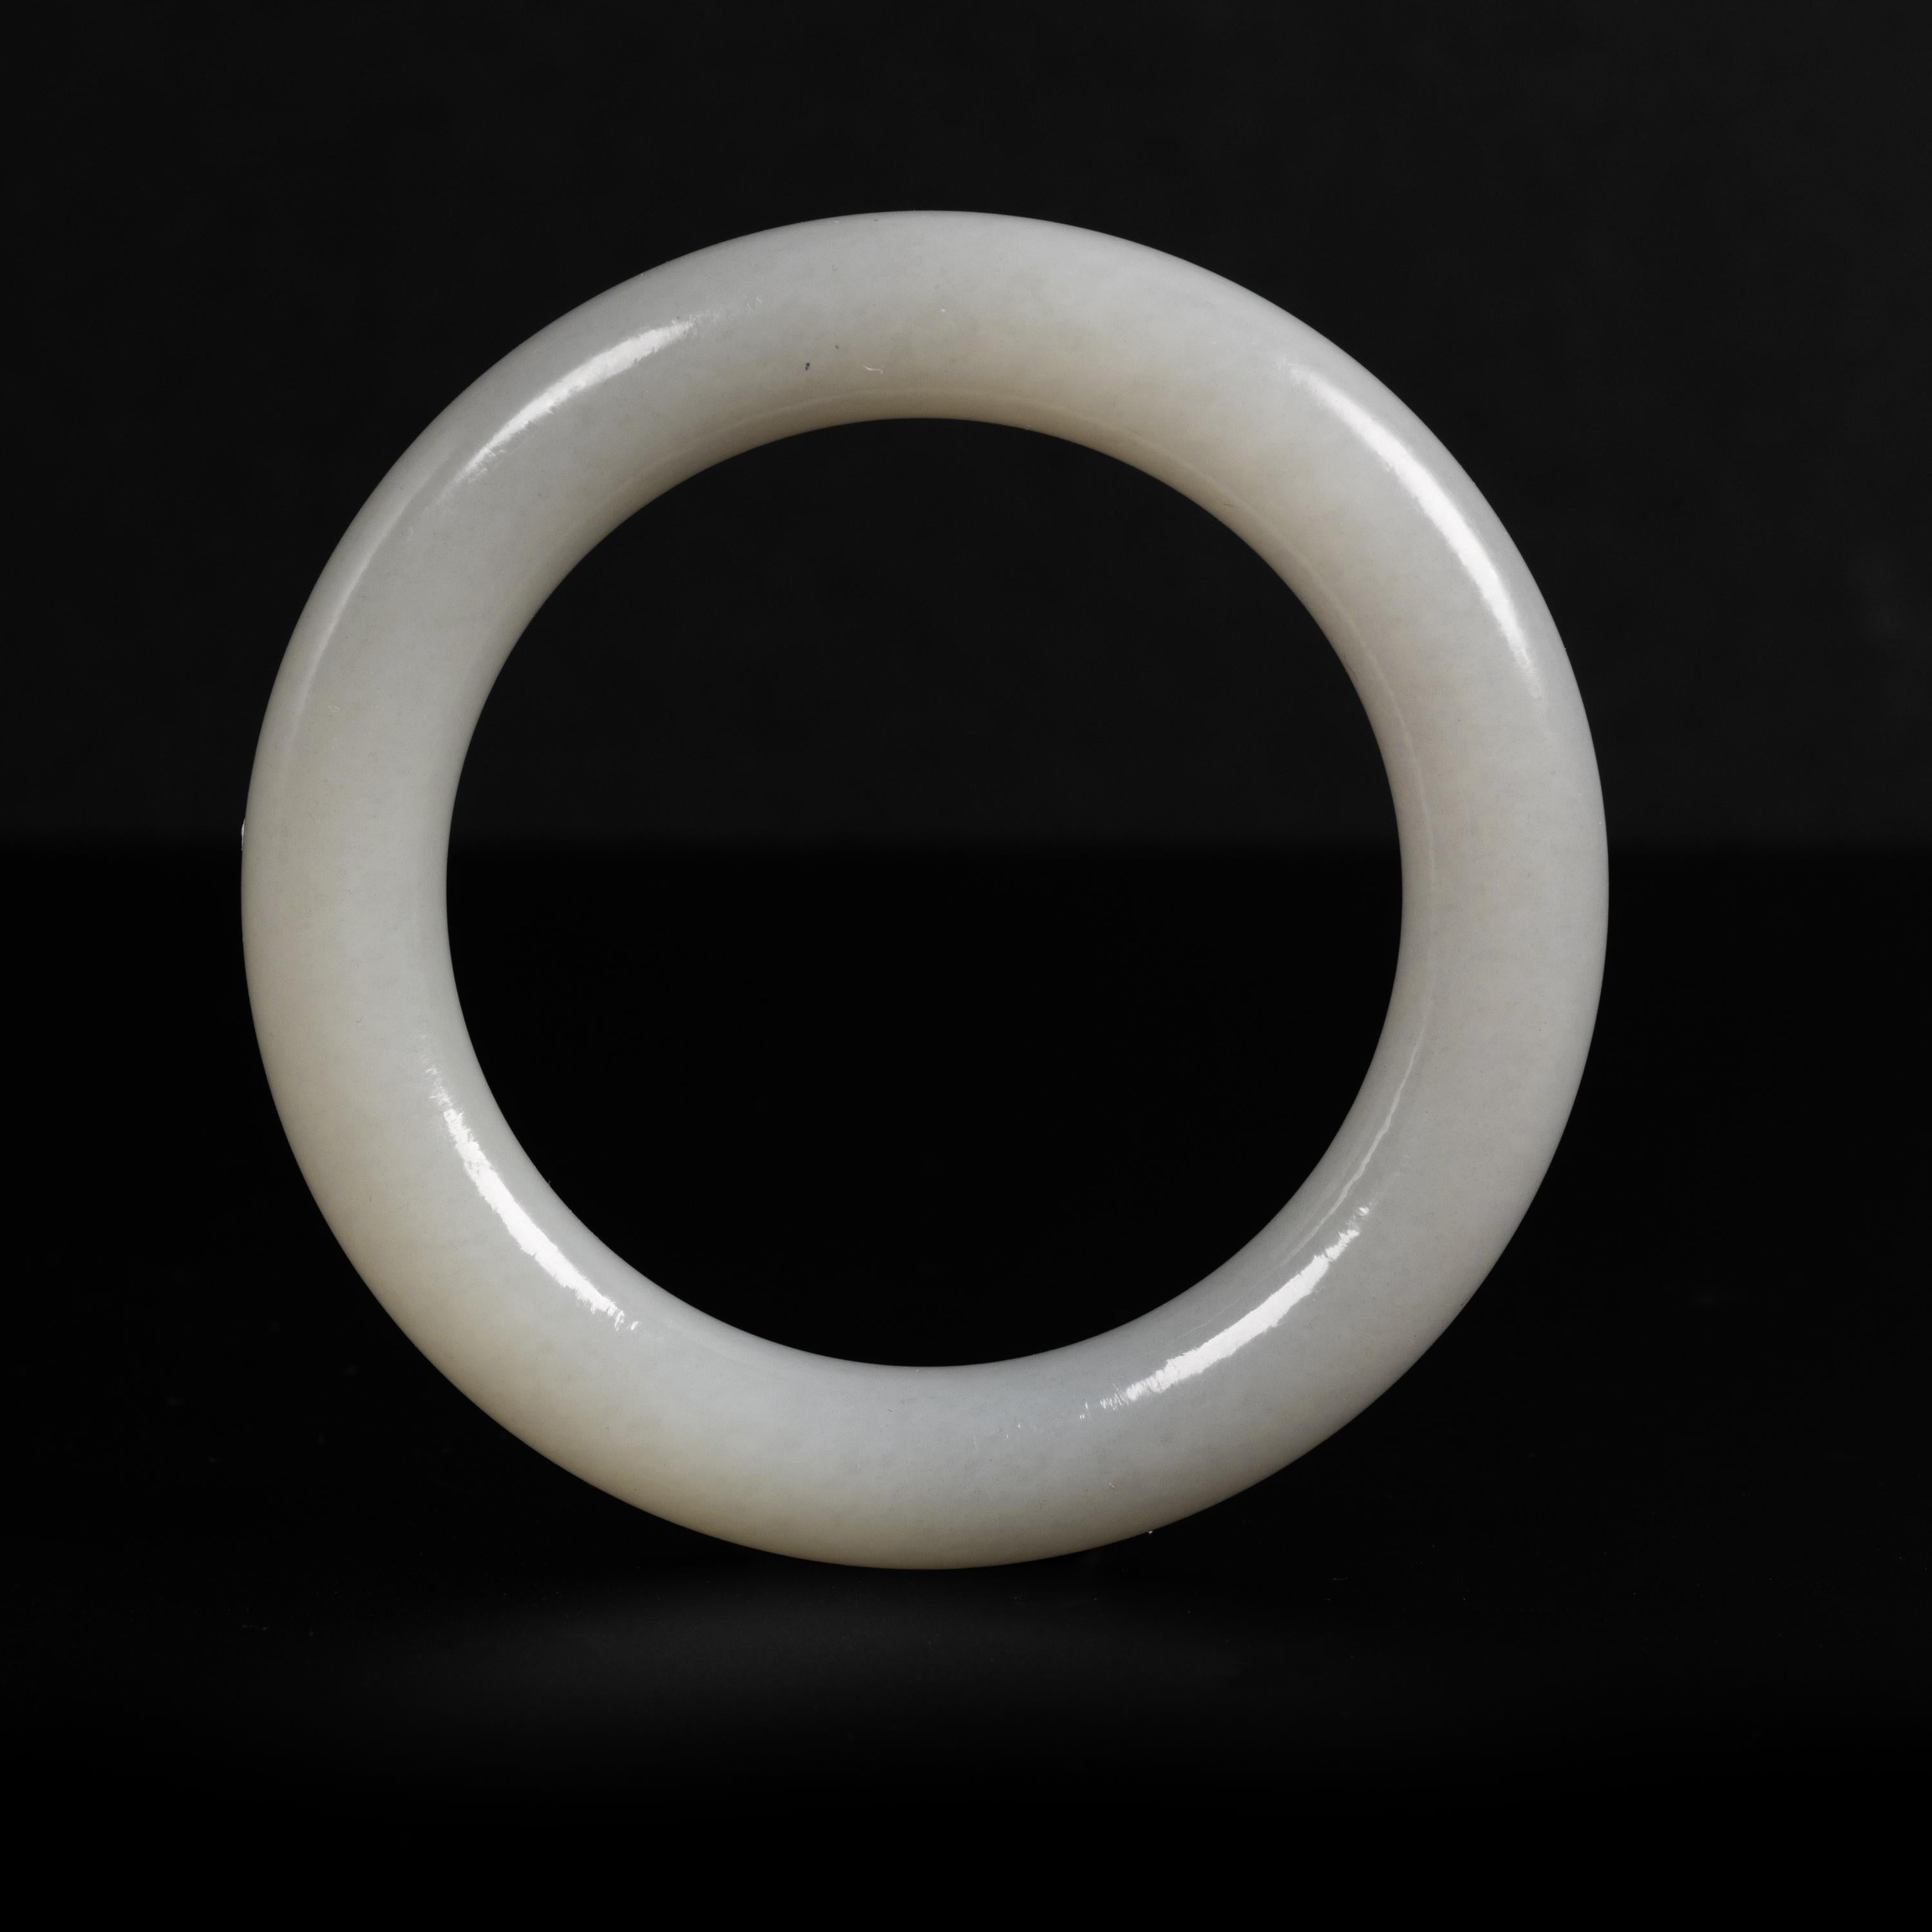 This 59mm hand-carved pale grayish-green nephrite jade bangle has been carved in the traditional round form that has been worn in China for thousands of years. Simple it may be, unadorned and free of decoration: but the jade is luminous and